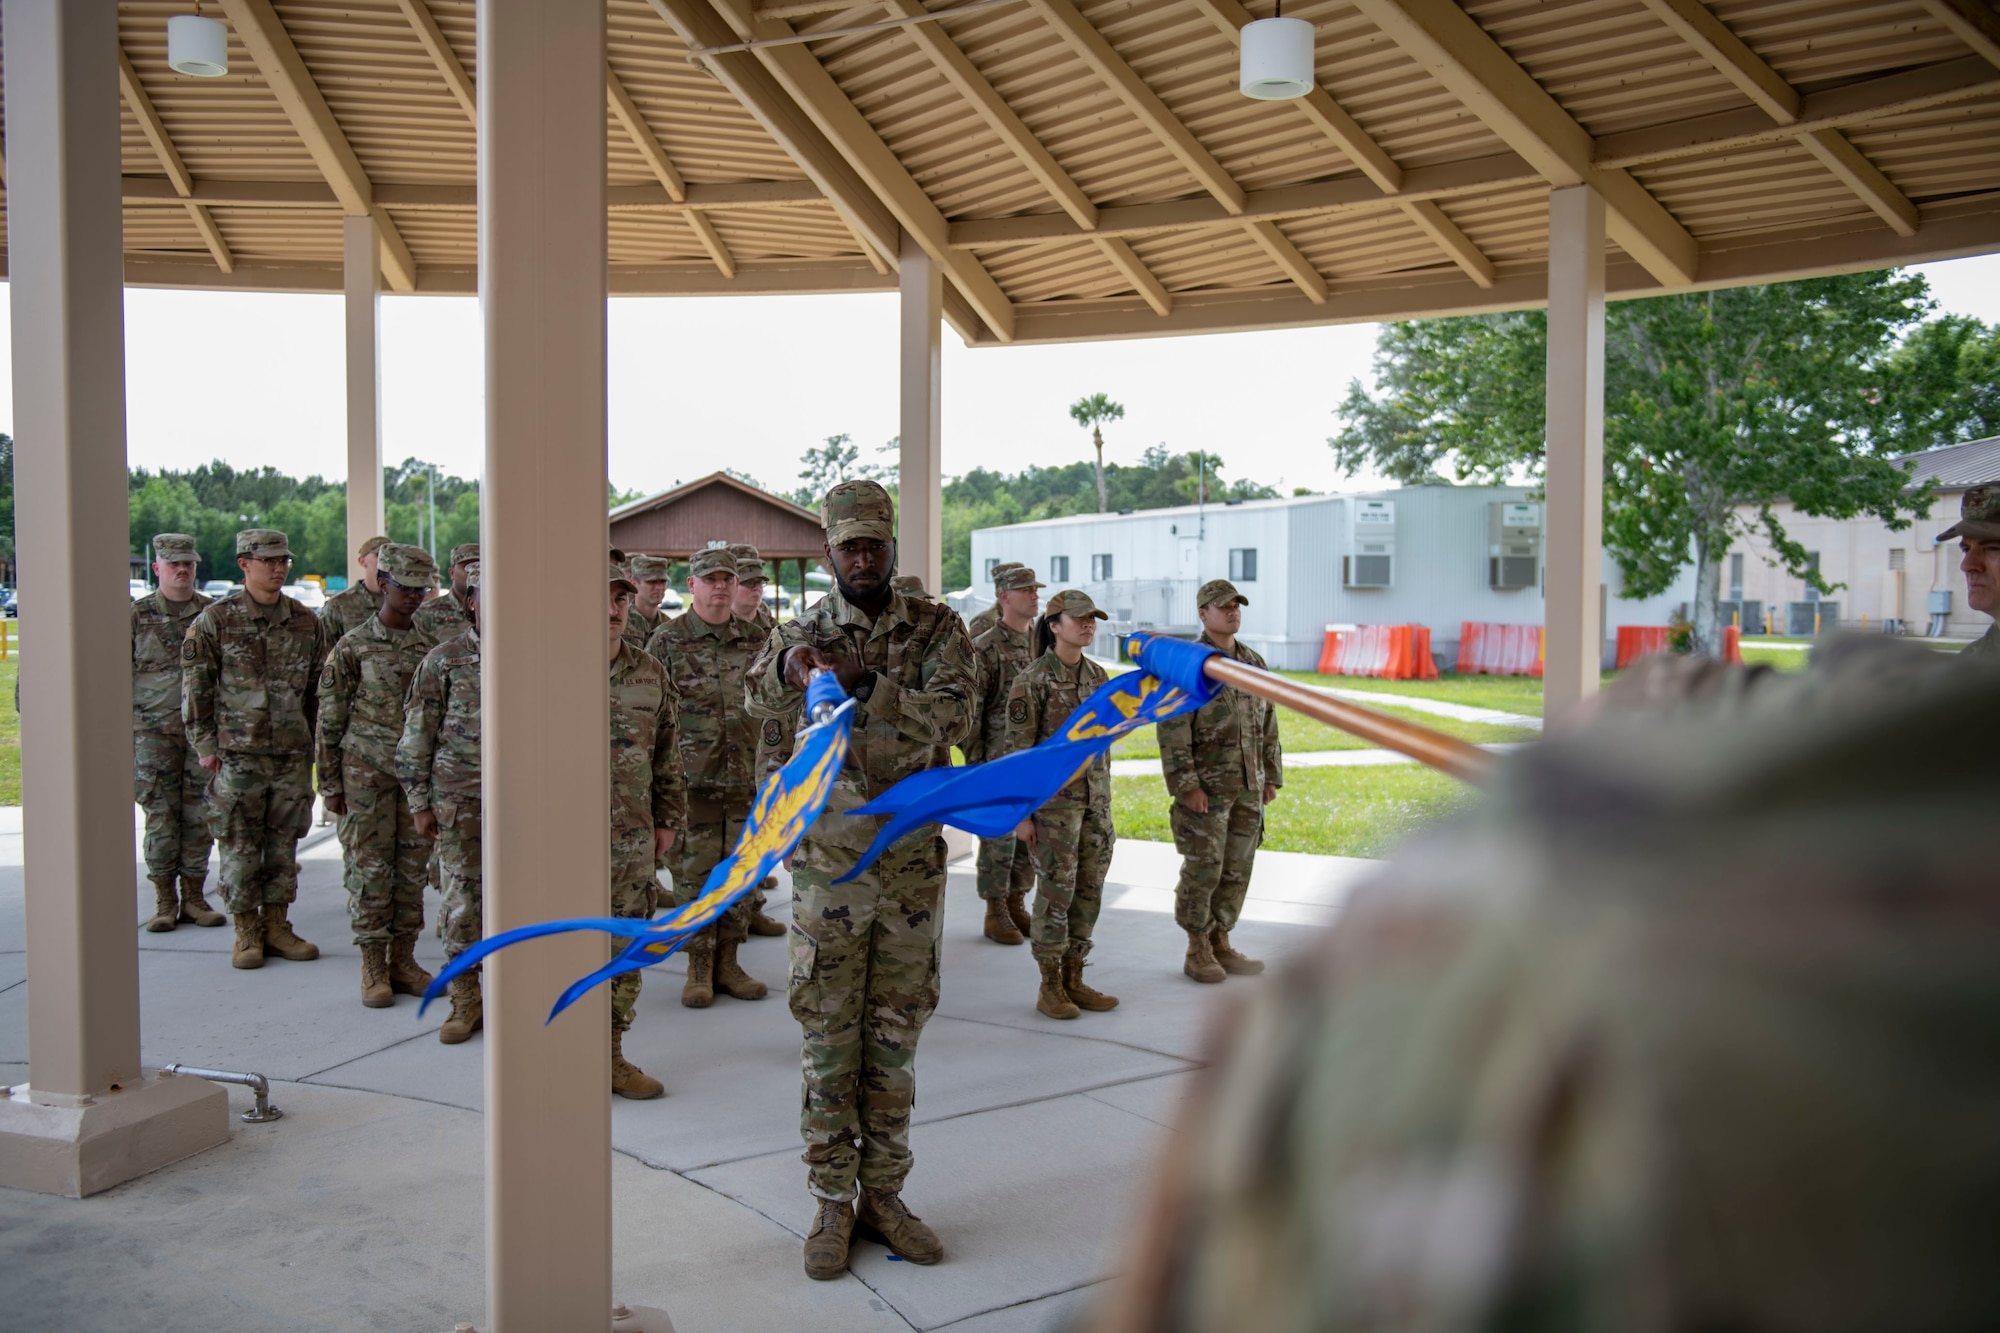 An activation ceremony was held for the newly-designated 125th Communications Squadron, April 2, 2023, at the 125th Fighter Wing in Jacksonville, Florida. The squadron was recently tasked with the stand-up of a Mission Defense Team (MDT) whose primary mission will be to provide functional mission assurance to the 125th Fighter Wing. The increased responsibility moves the 125th communications flight beyond its base communications and information technology focus resulting in the redesignation as a squadron. (U.S. Air National Guard photo by Staff Sgt. Cole Benjamin)